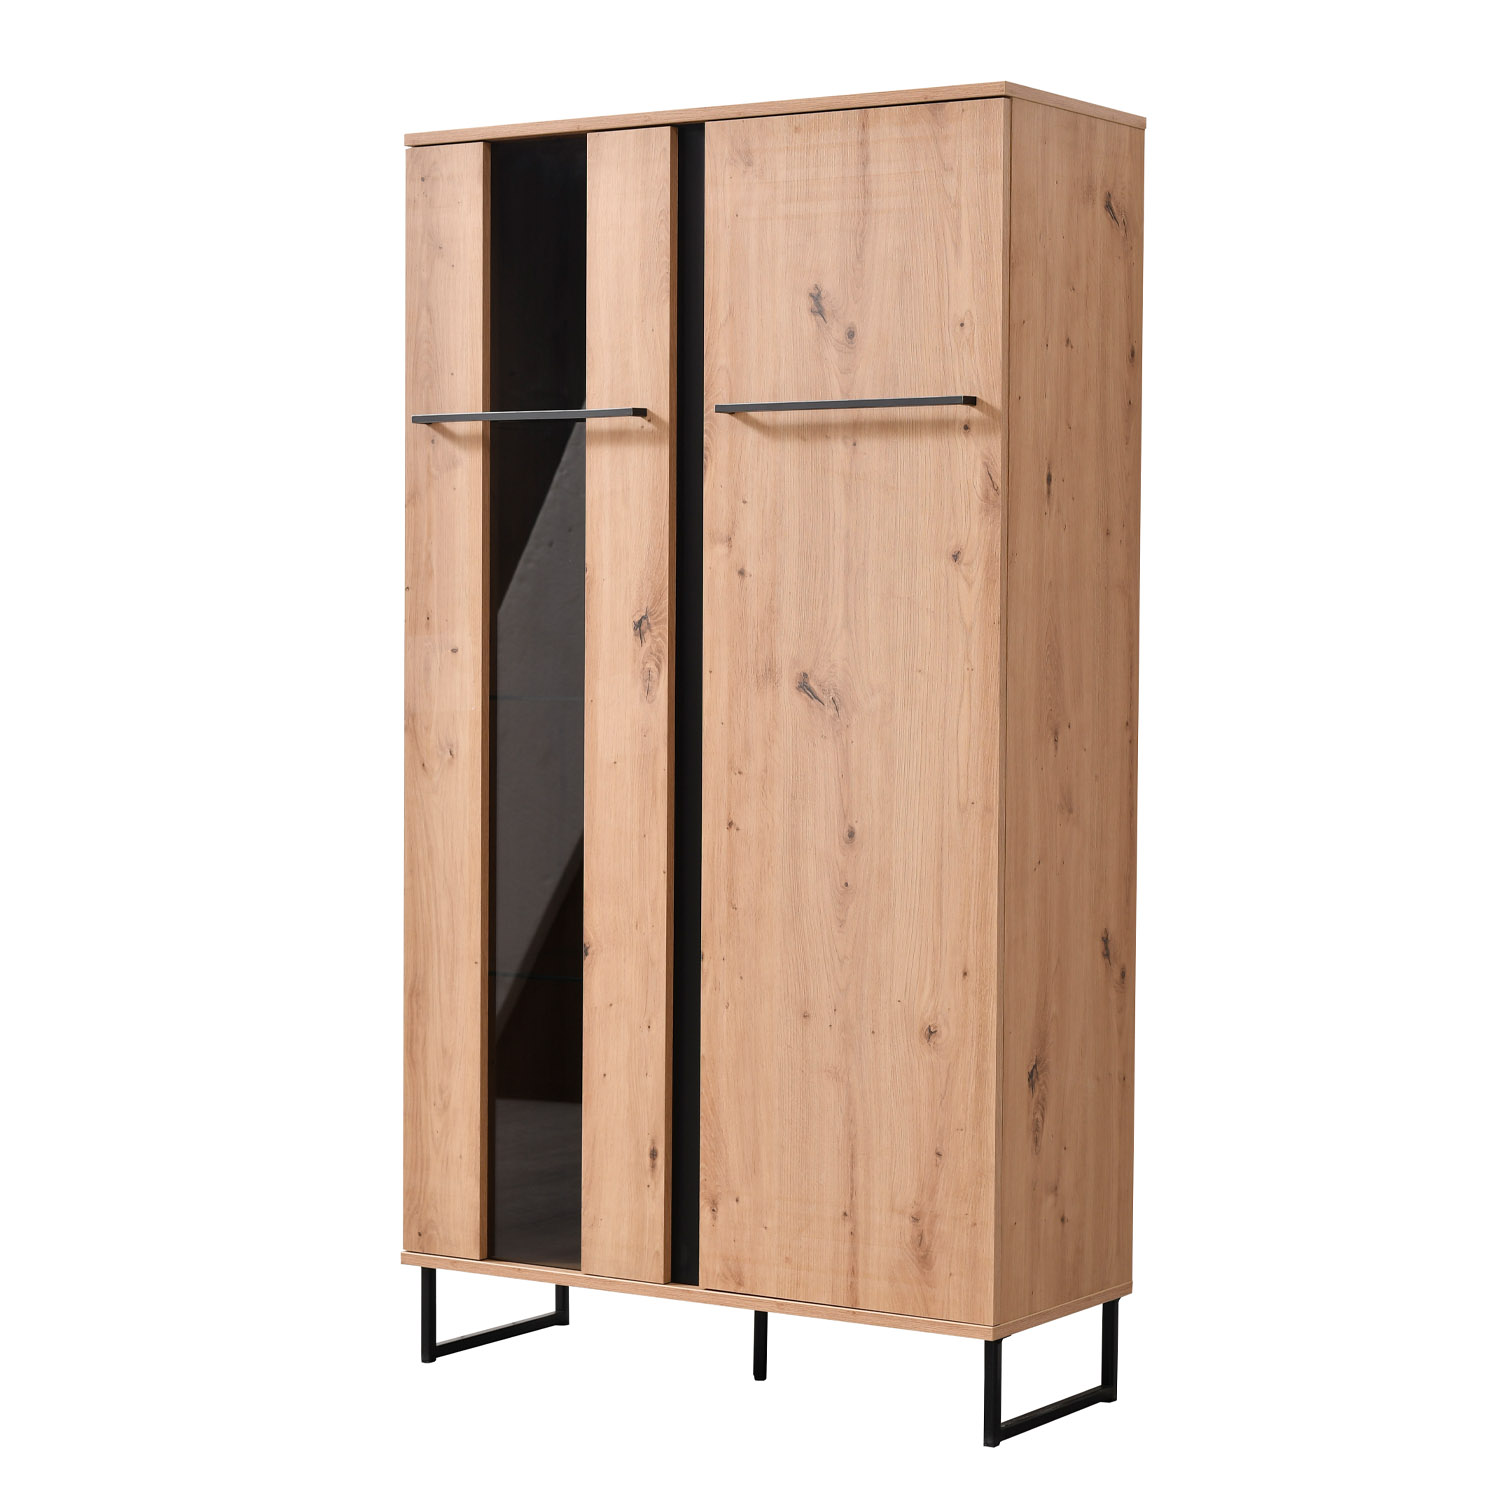 Highboard Display Cabinet with Compartments Living Room Cabinet Wood Natural Skid Feet Black